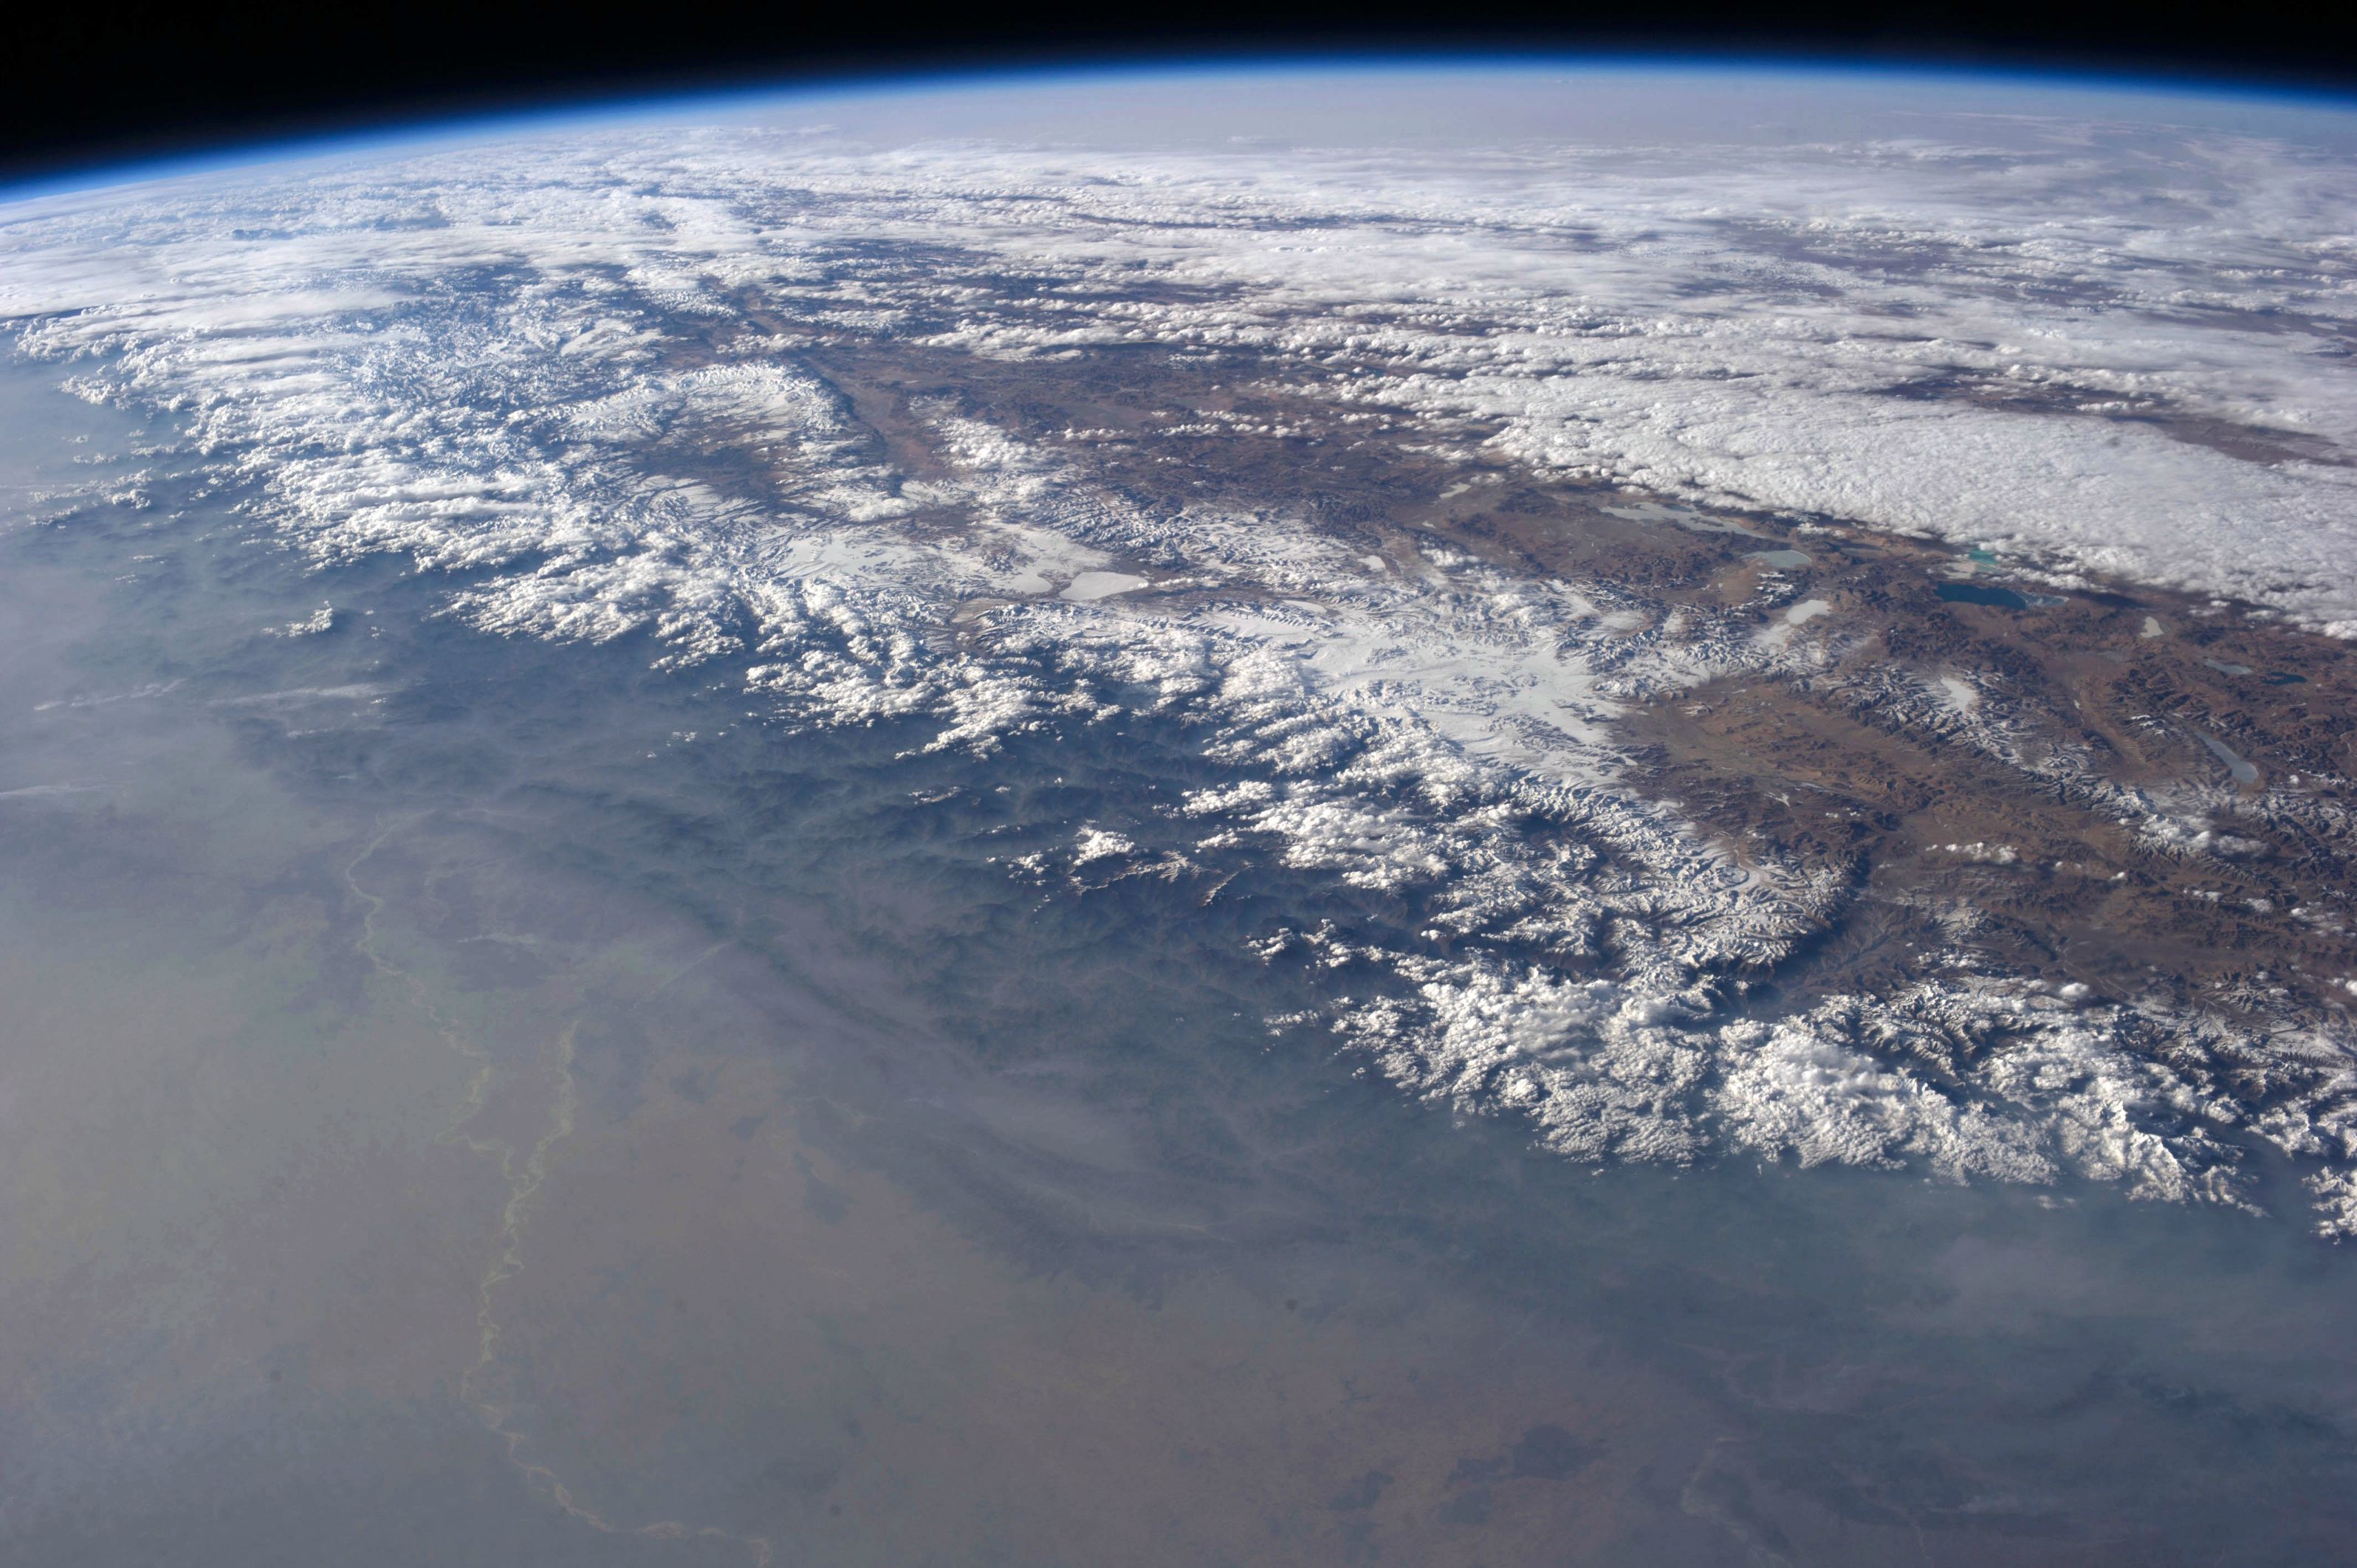 The Himalayas from space